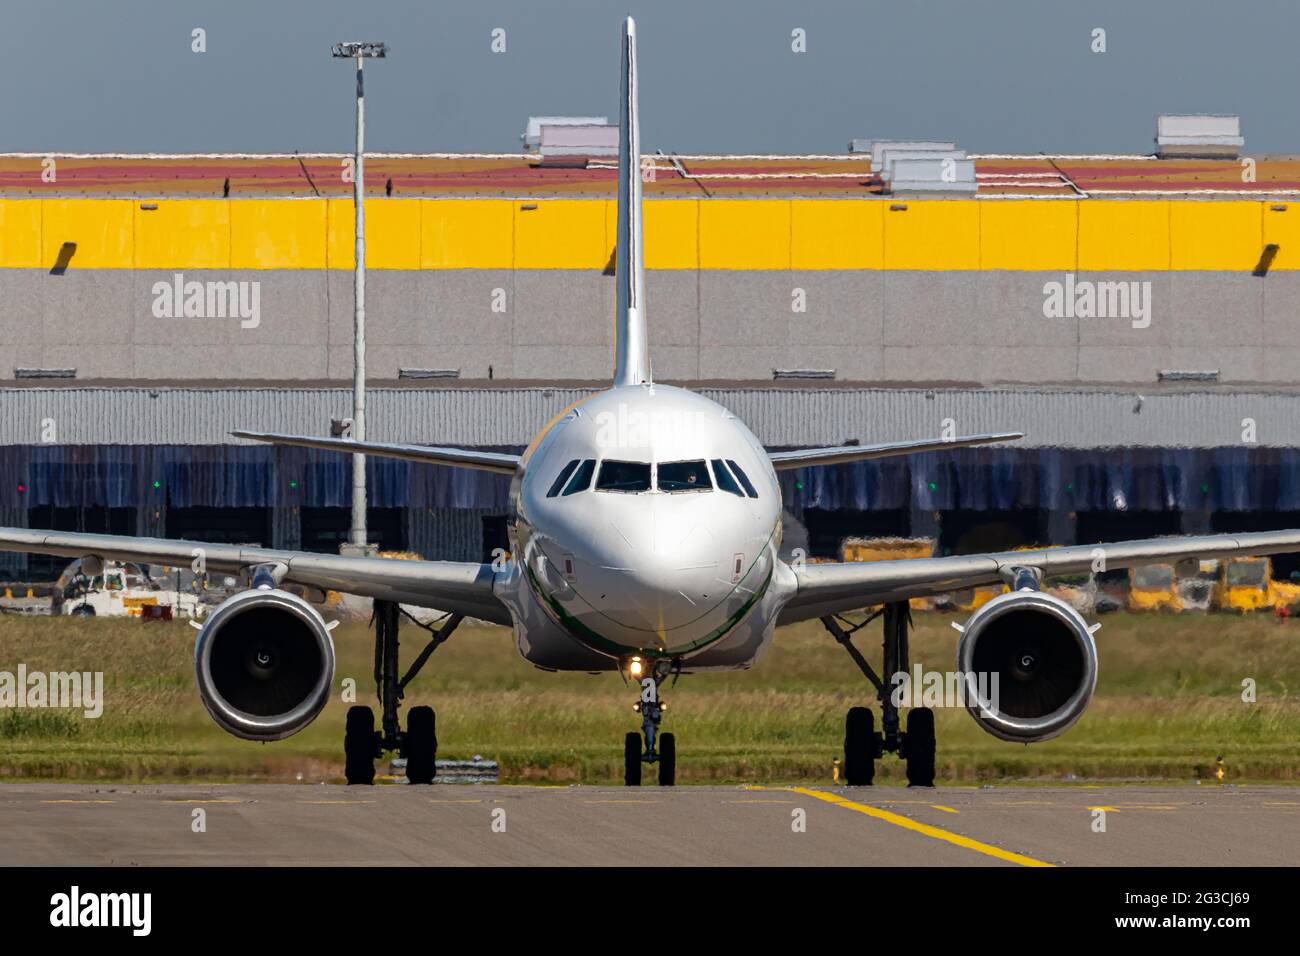 Front view of an commercial aircraft Stock Photo